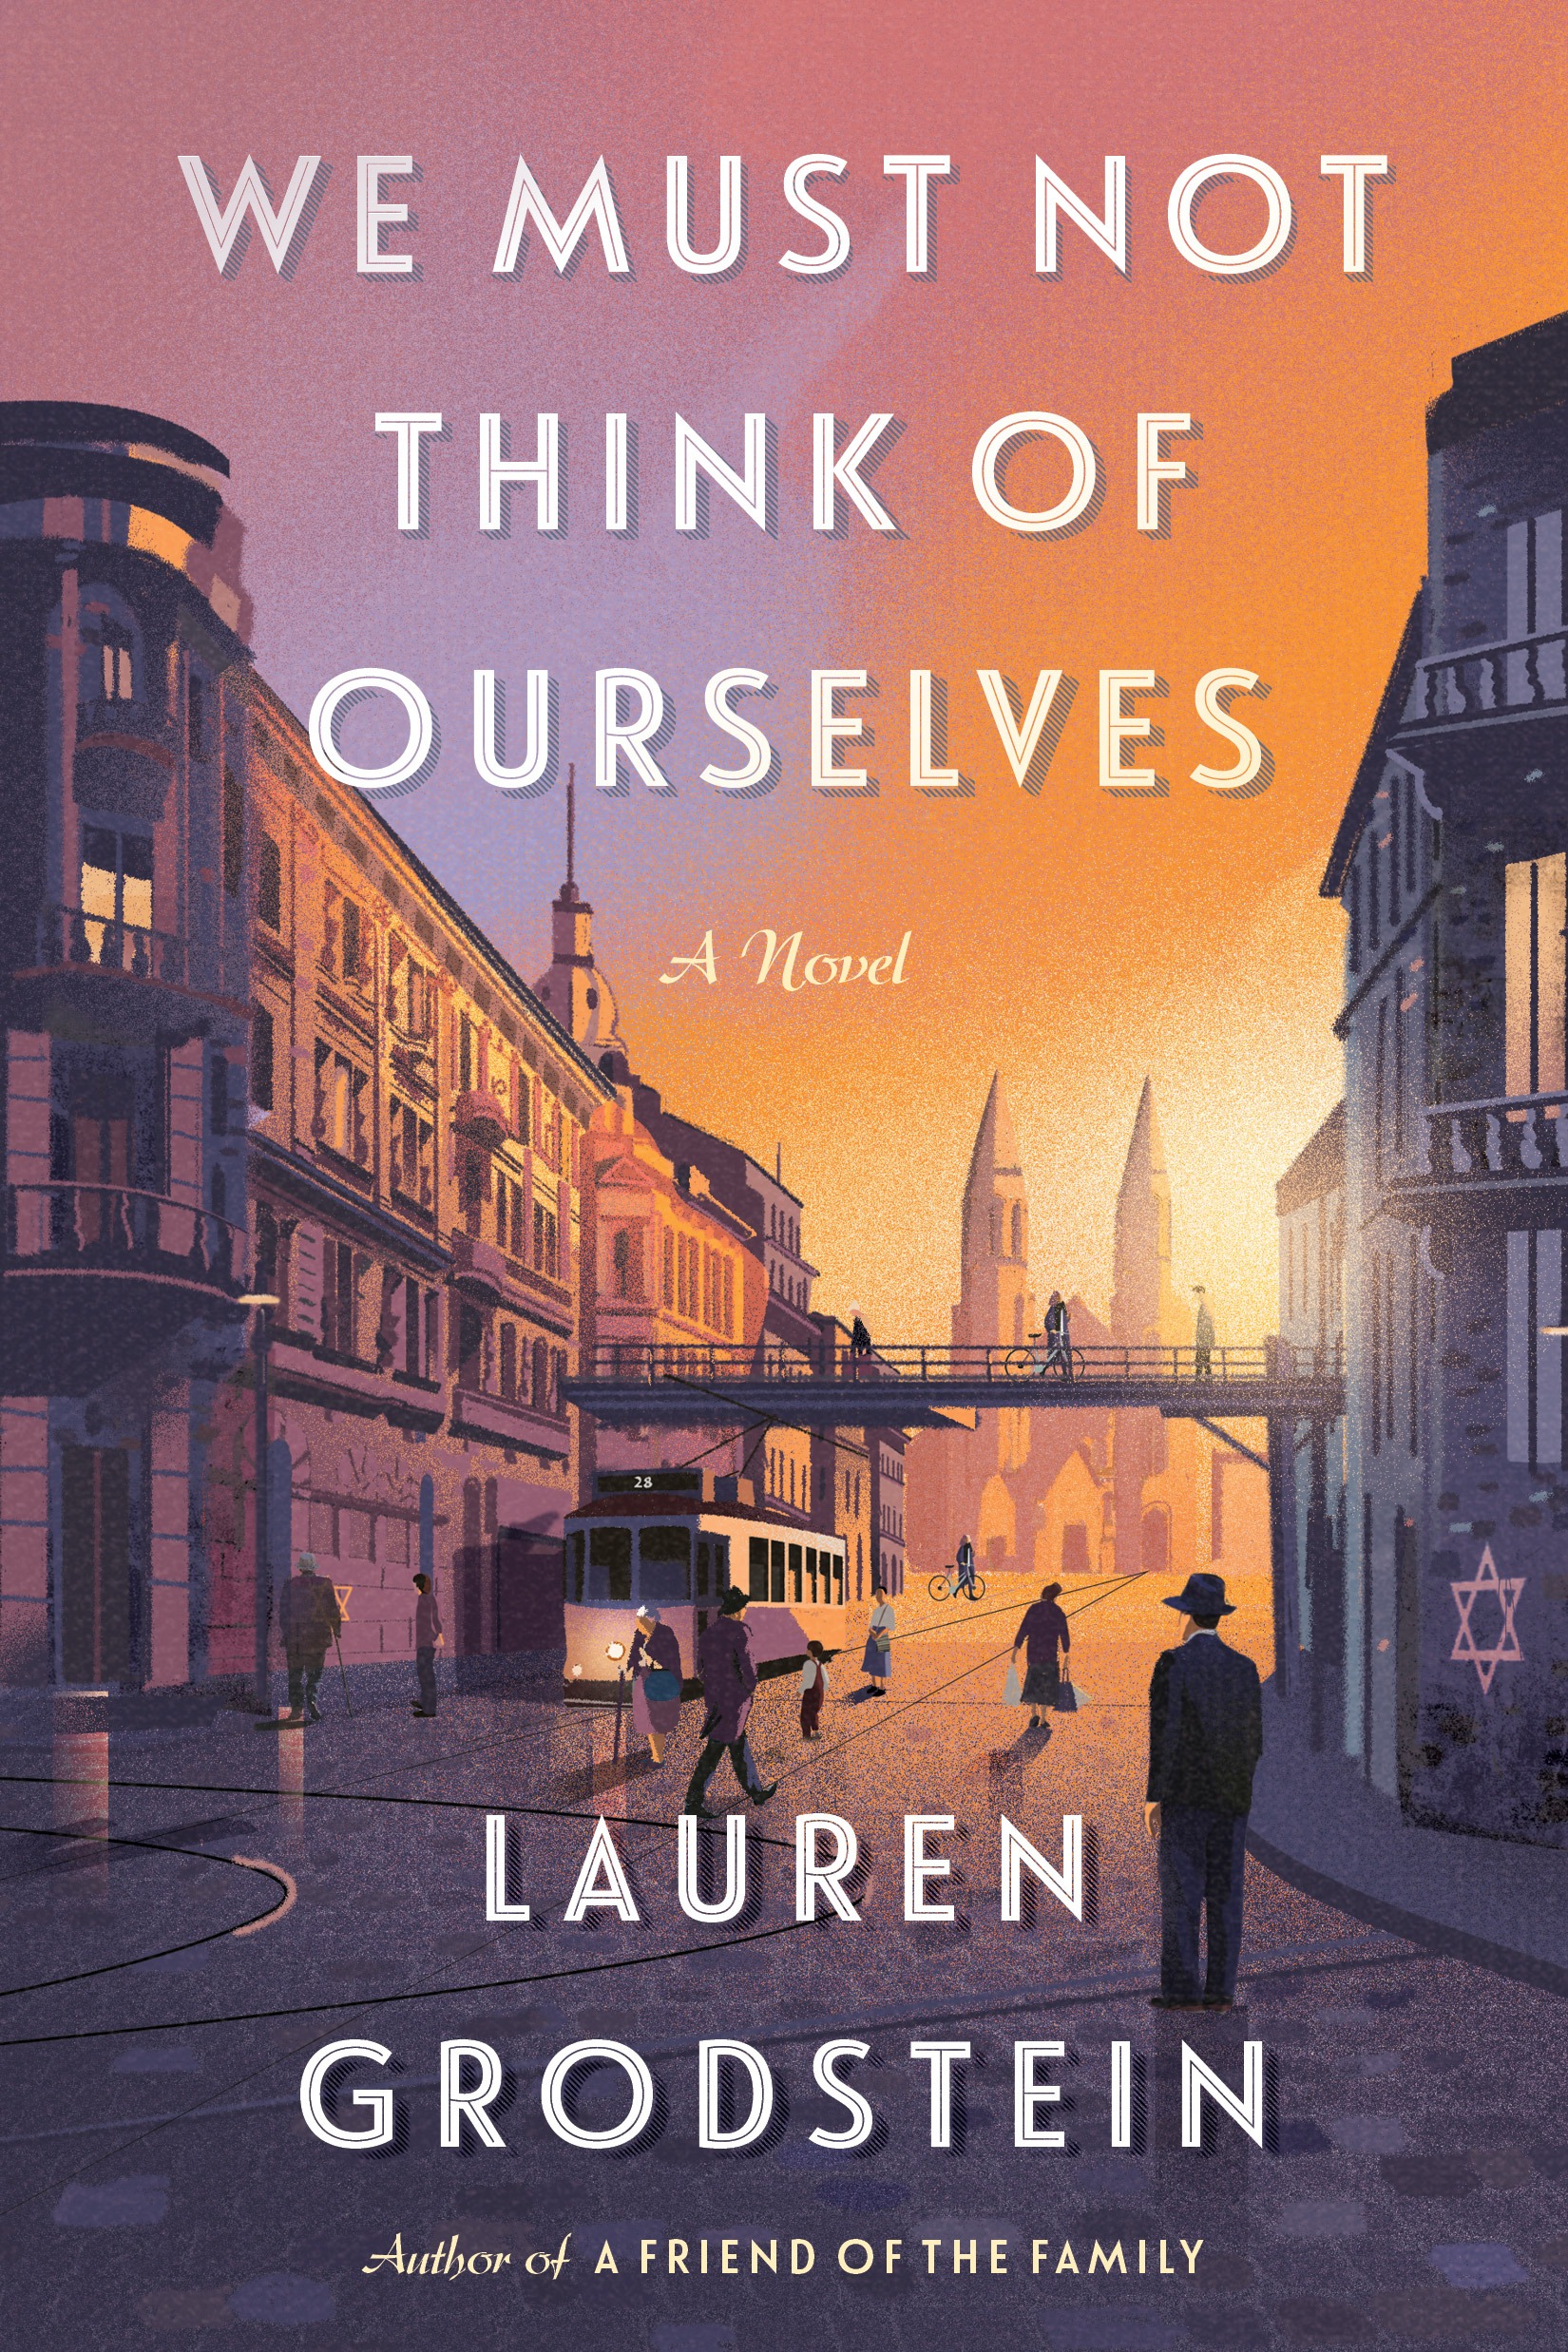 Cover of "We Must Not Think of Ourselves" by Lauren Grodstein